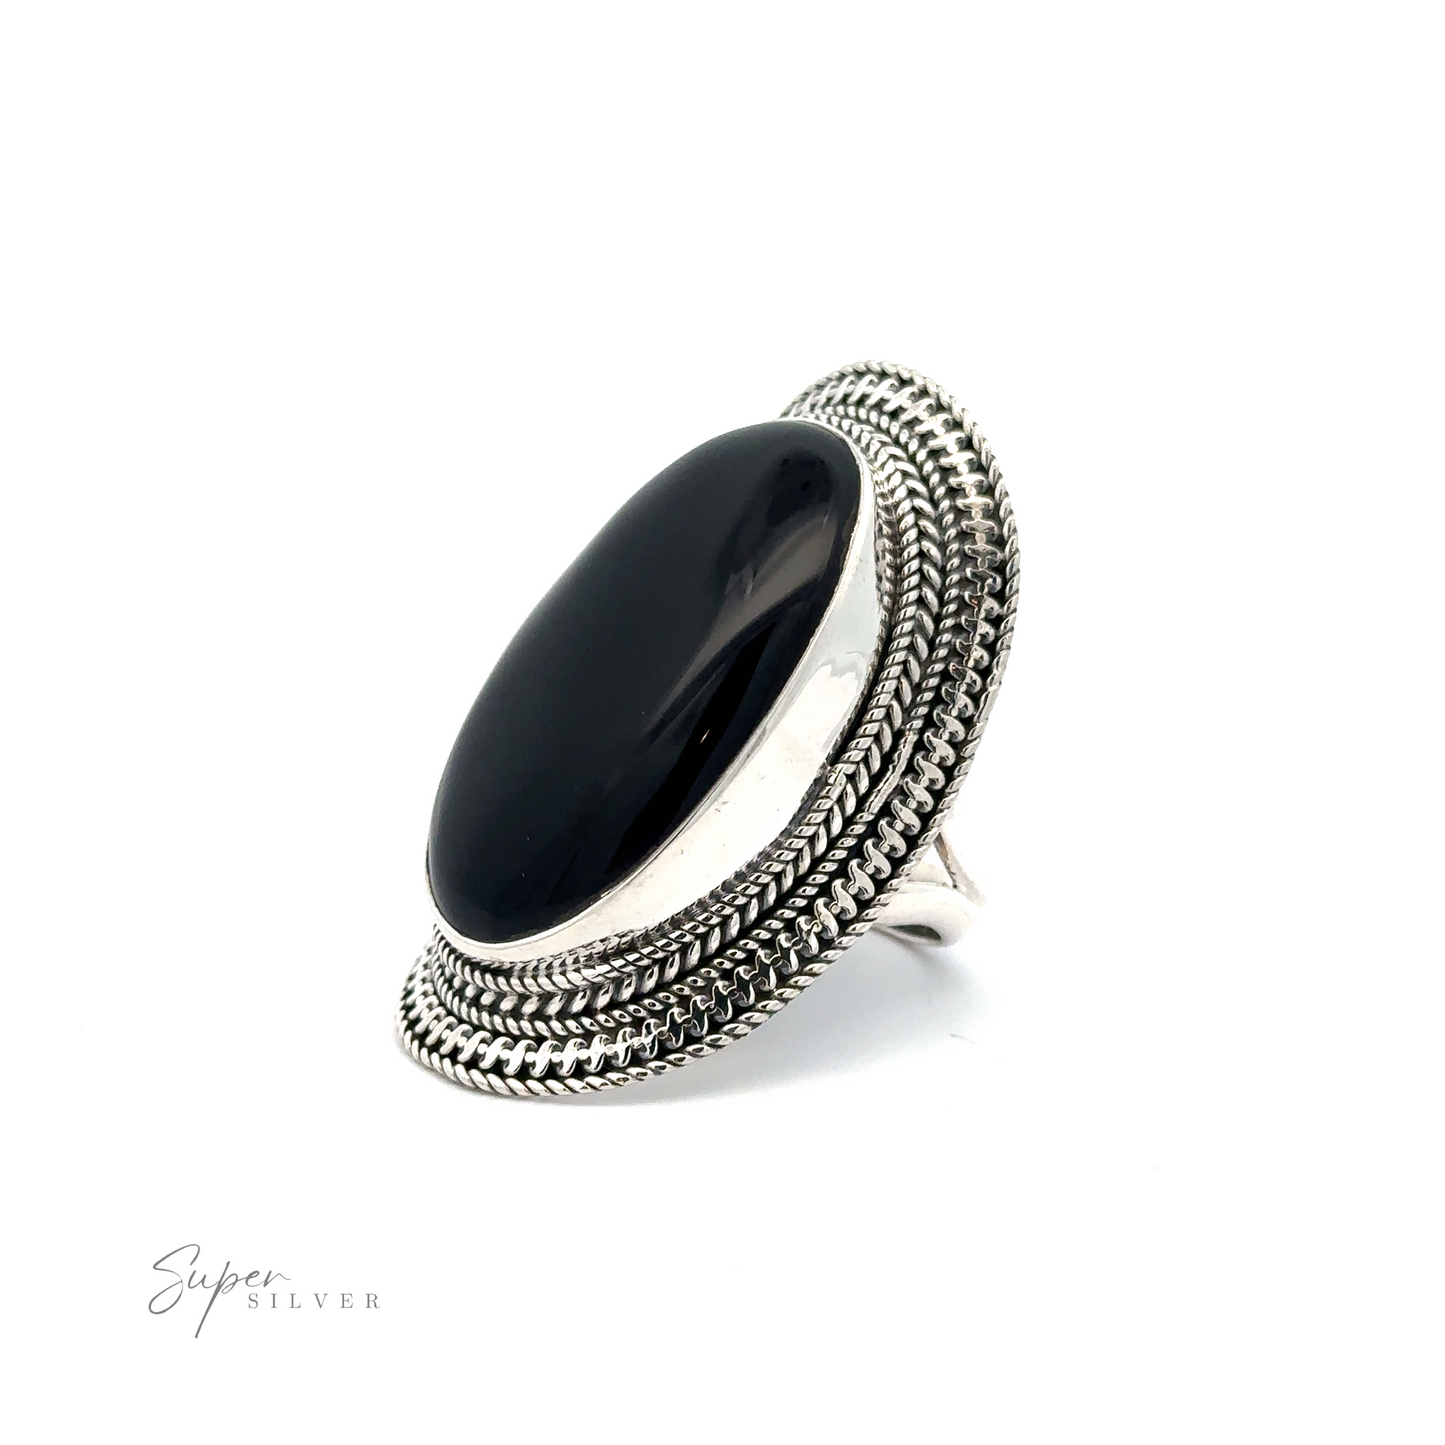 
                  
                    A Large Oval Shield Gemstone Ring featuring an oval gemstone with intricate braided metal detailing around the stone. The brand name "Super Silver" is visible in the corner, adding a touch of bohemian flair.
                  
                